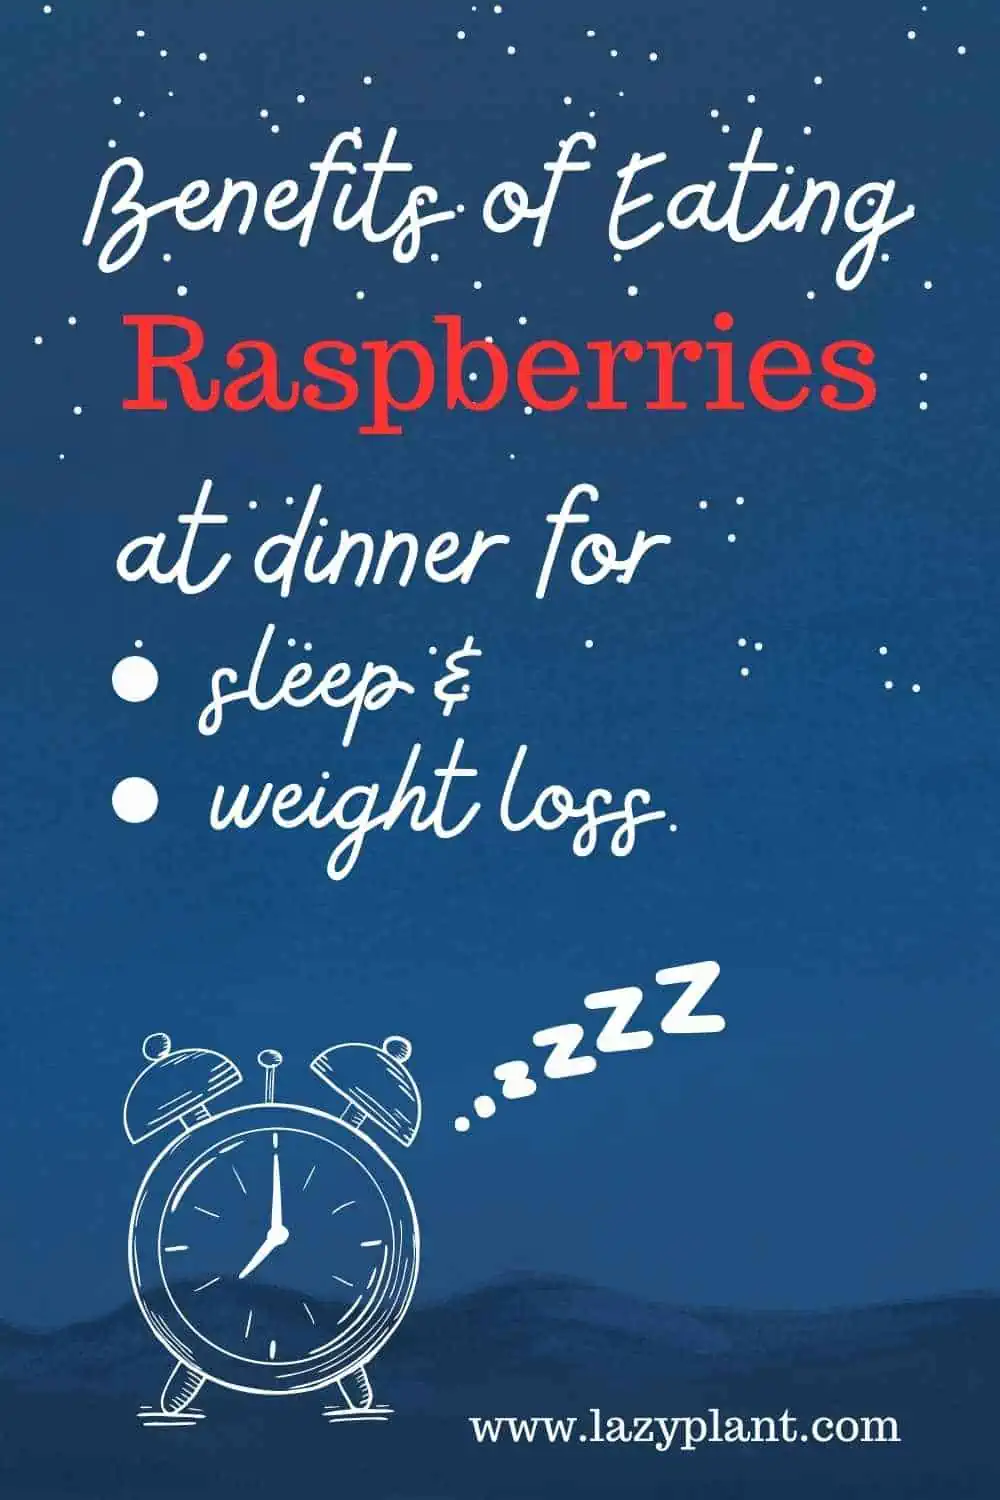 Raspberries before bed support a good night's sleep & weight loss